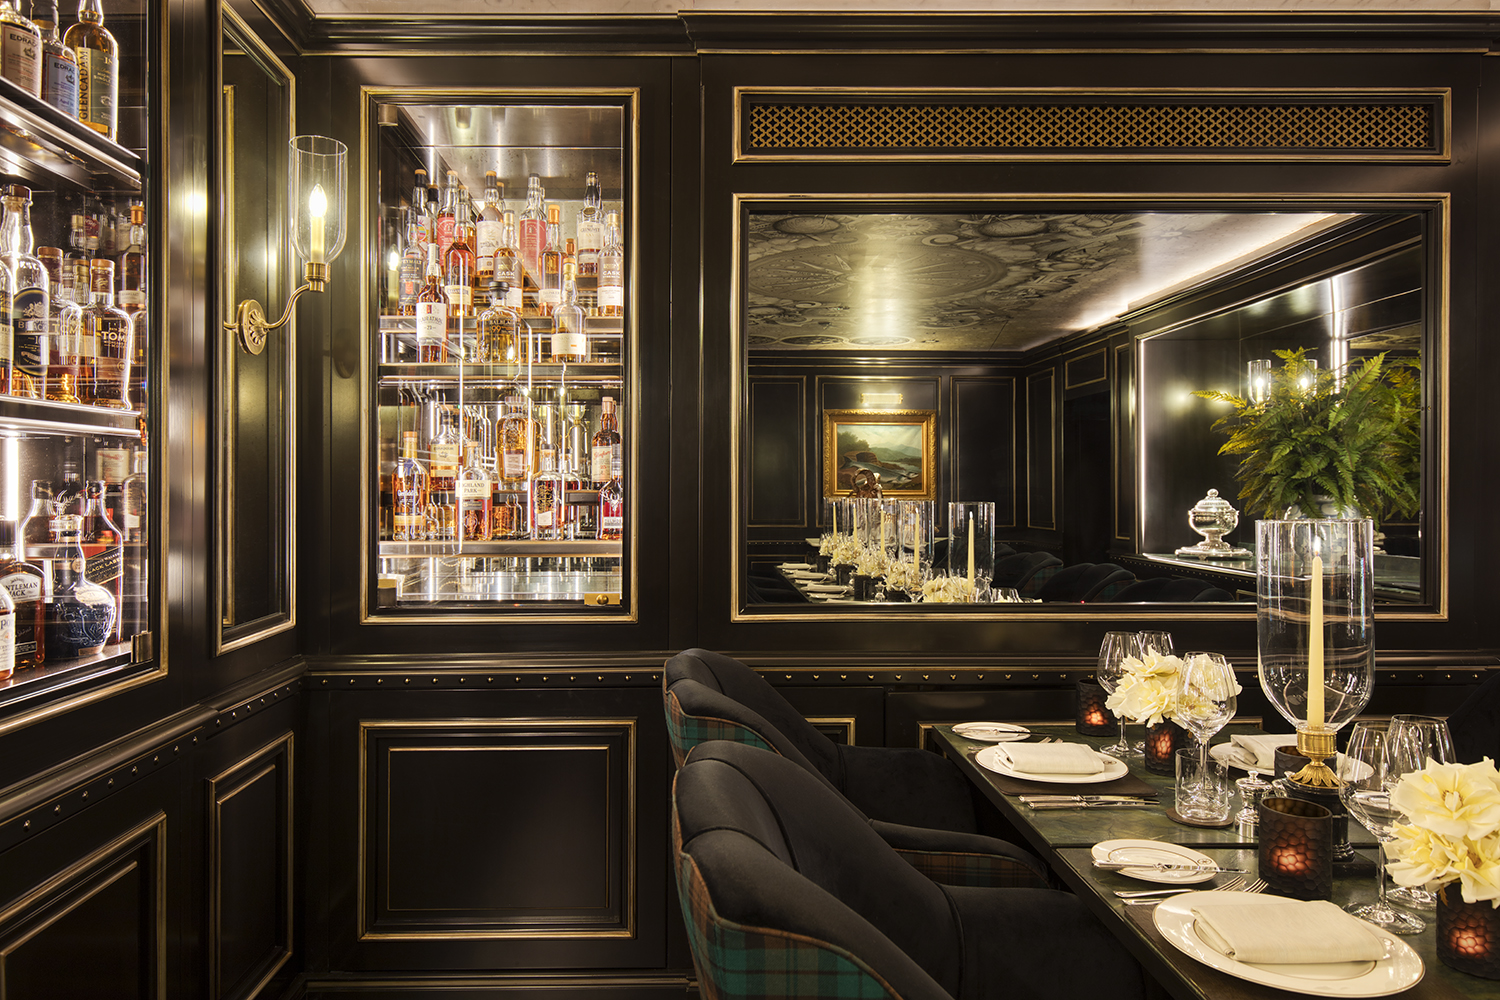 Punctuated with an astrological mural on the ceiling, Ghillie’s Pantry at 100 Princes Street in Edinburgh offers more than 100 whisky varieties.